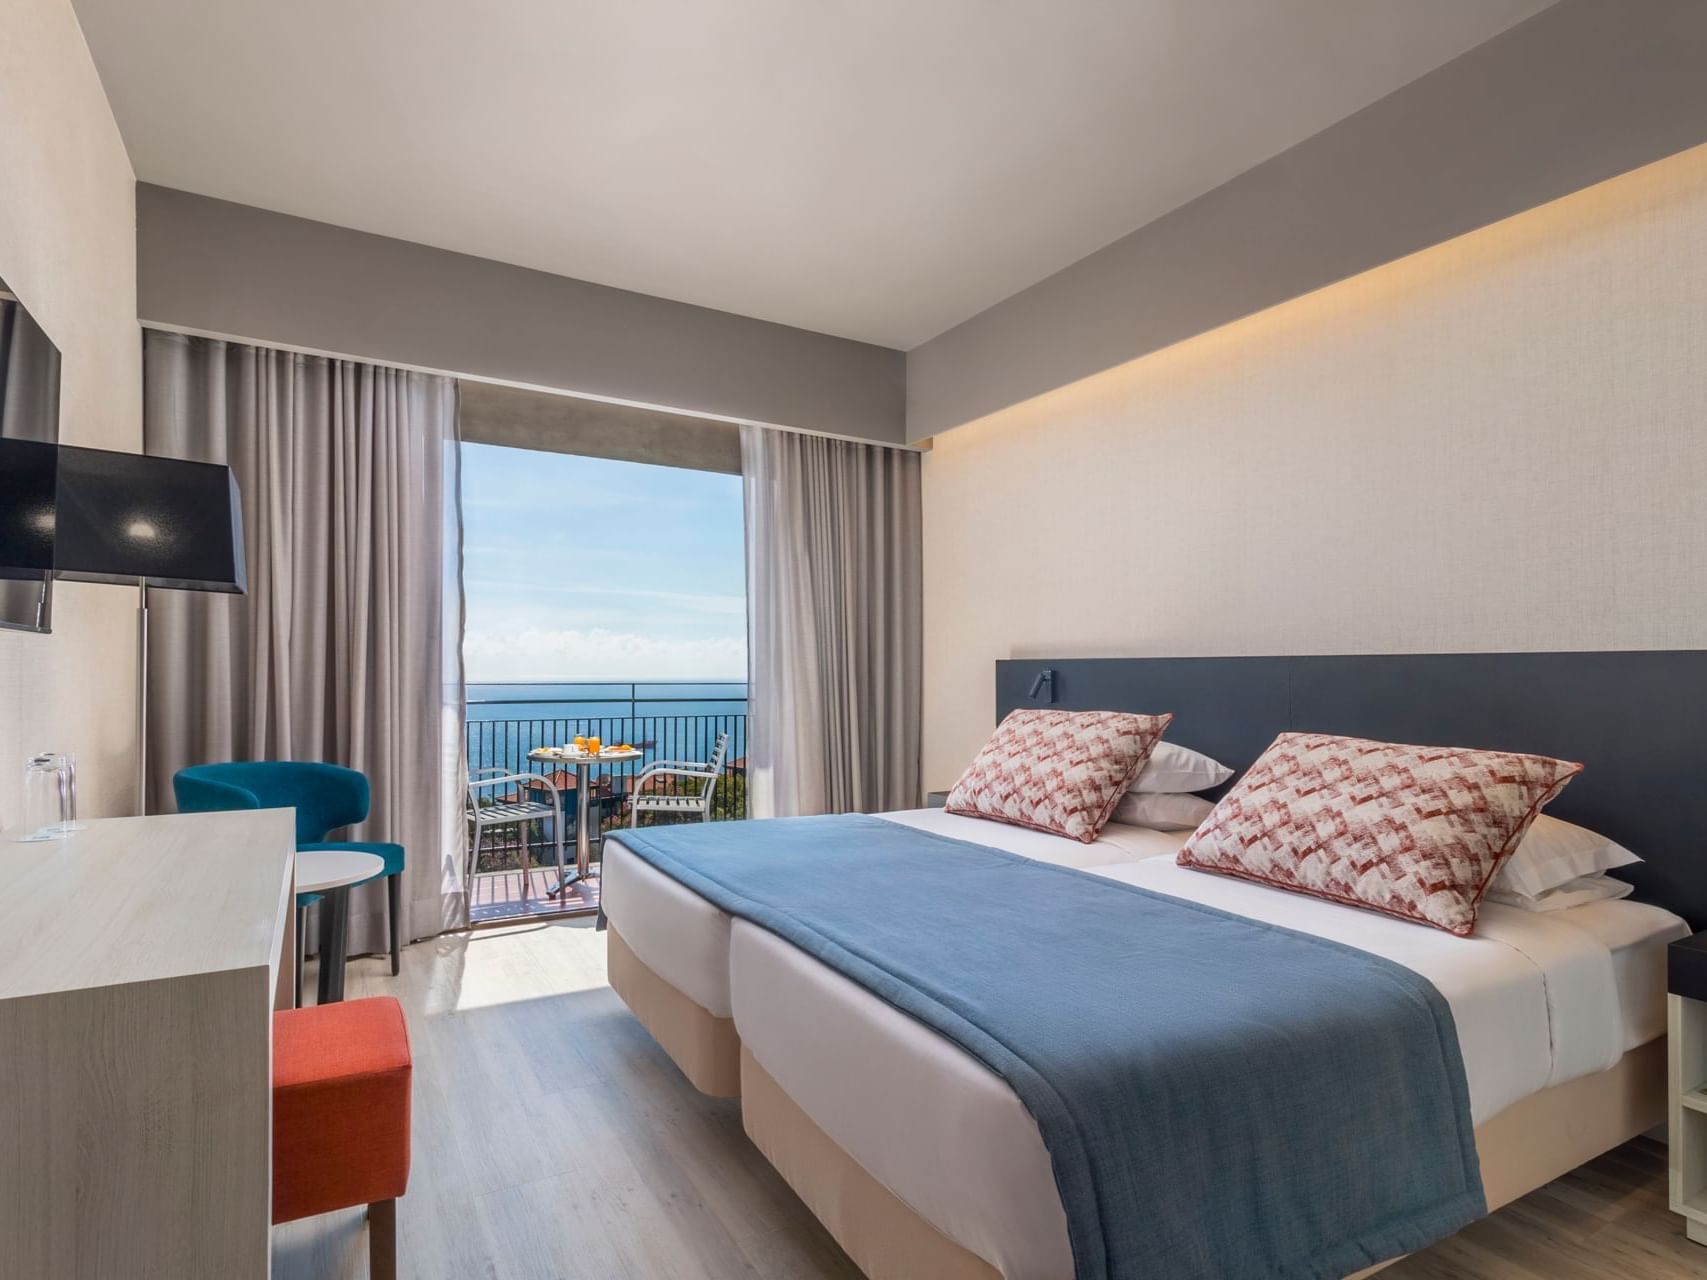 Sea View Room at Enotel Magnólia in Funchal, Madeira